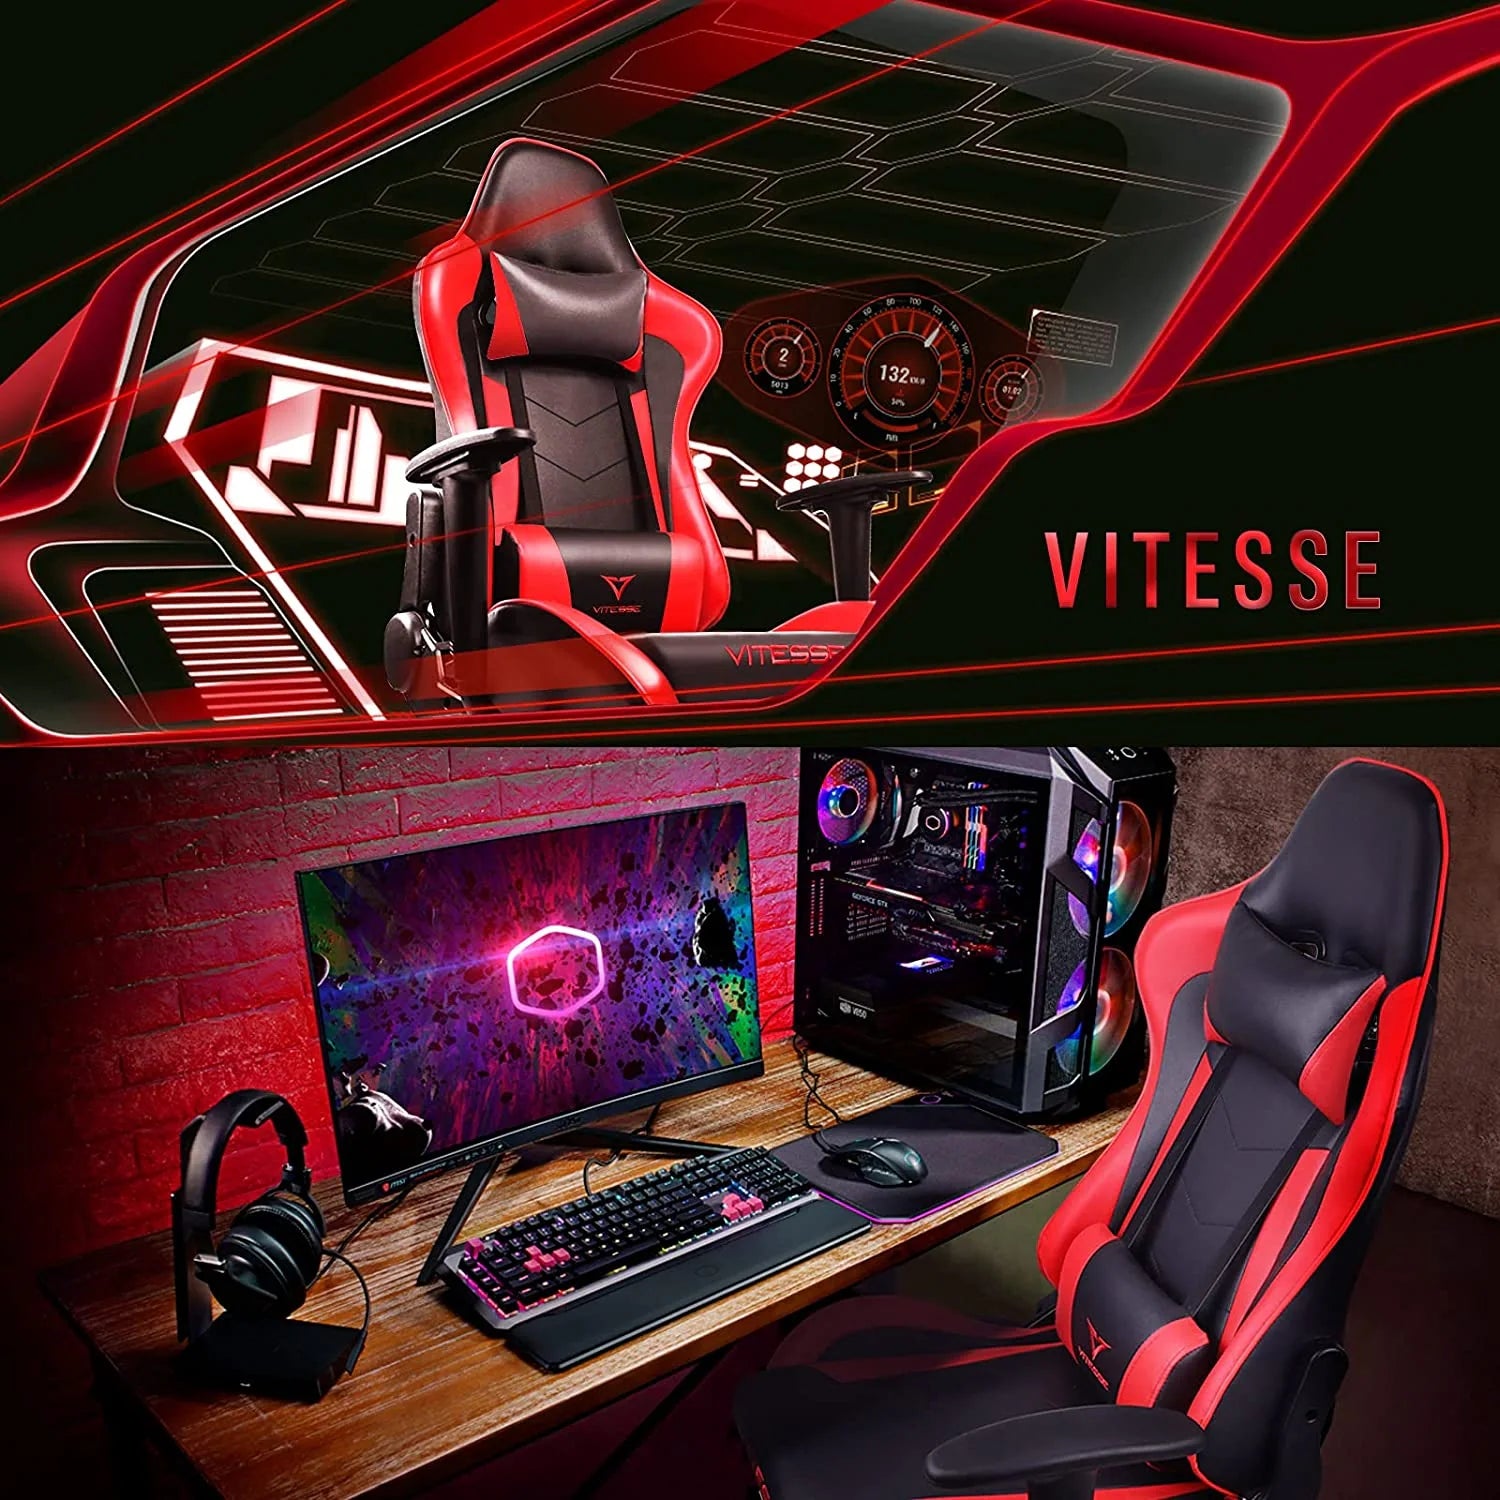 Gaming Chair High Back Computer Office Chair with Lumbar Support and Headrest